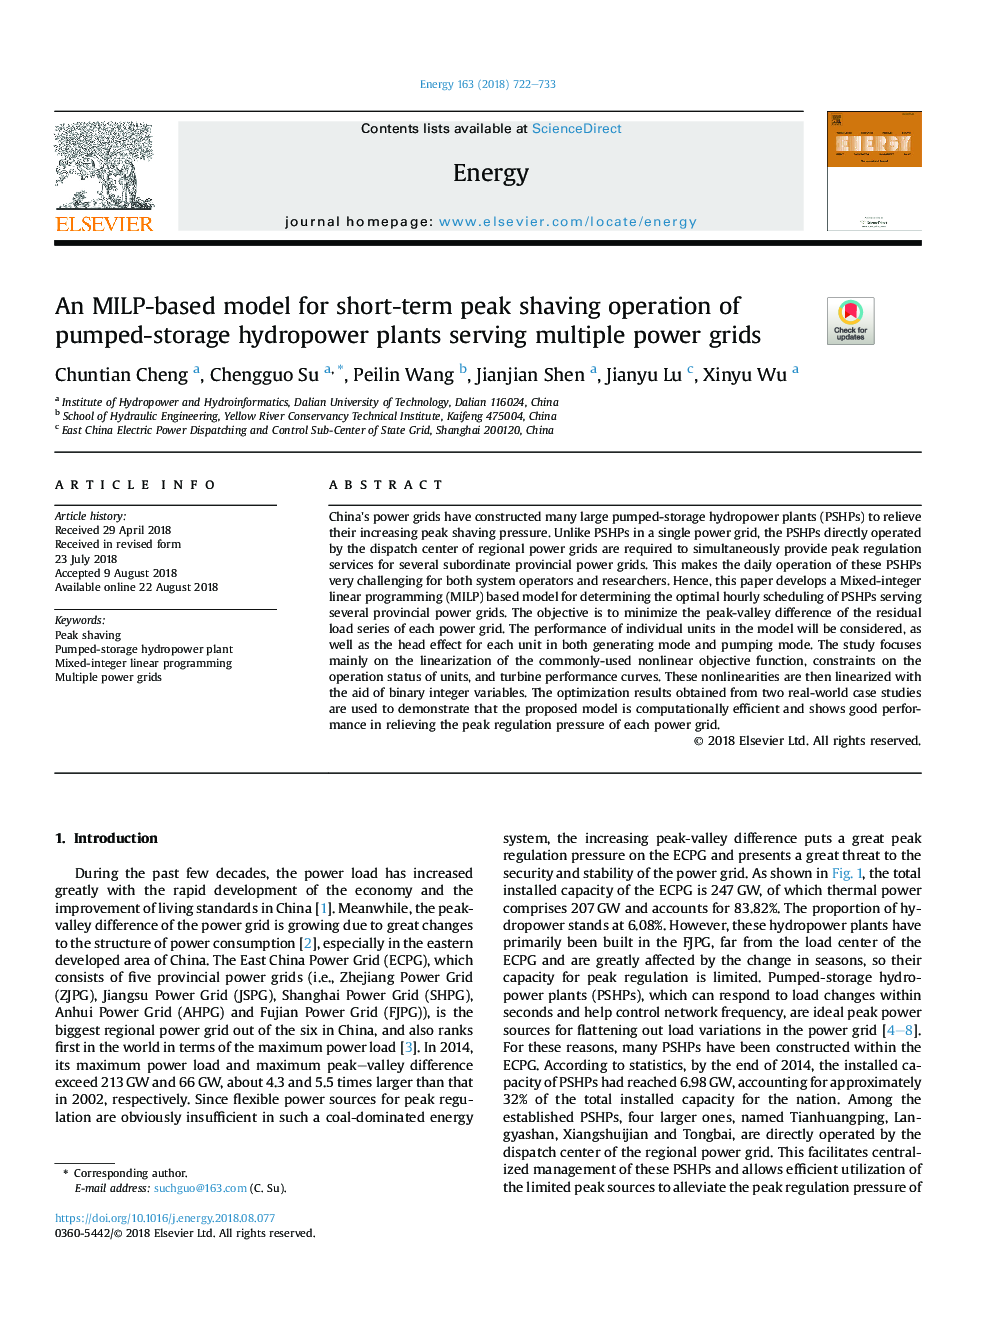 An MILP-based model for short-term peak shaving operation of pumped-storage hydropower plants serving multiple power grids